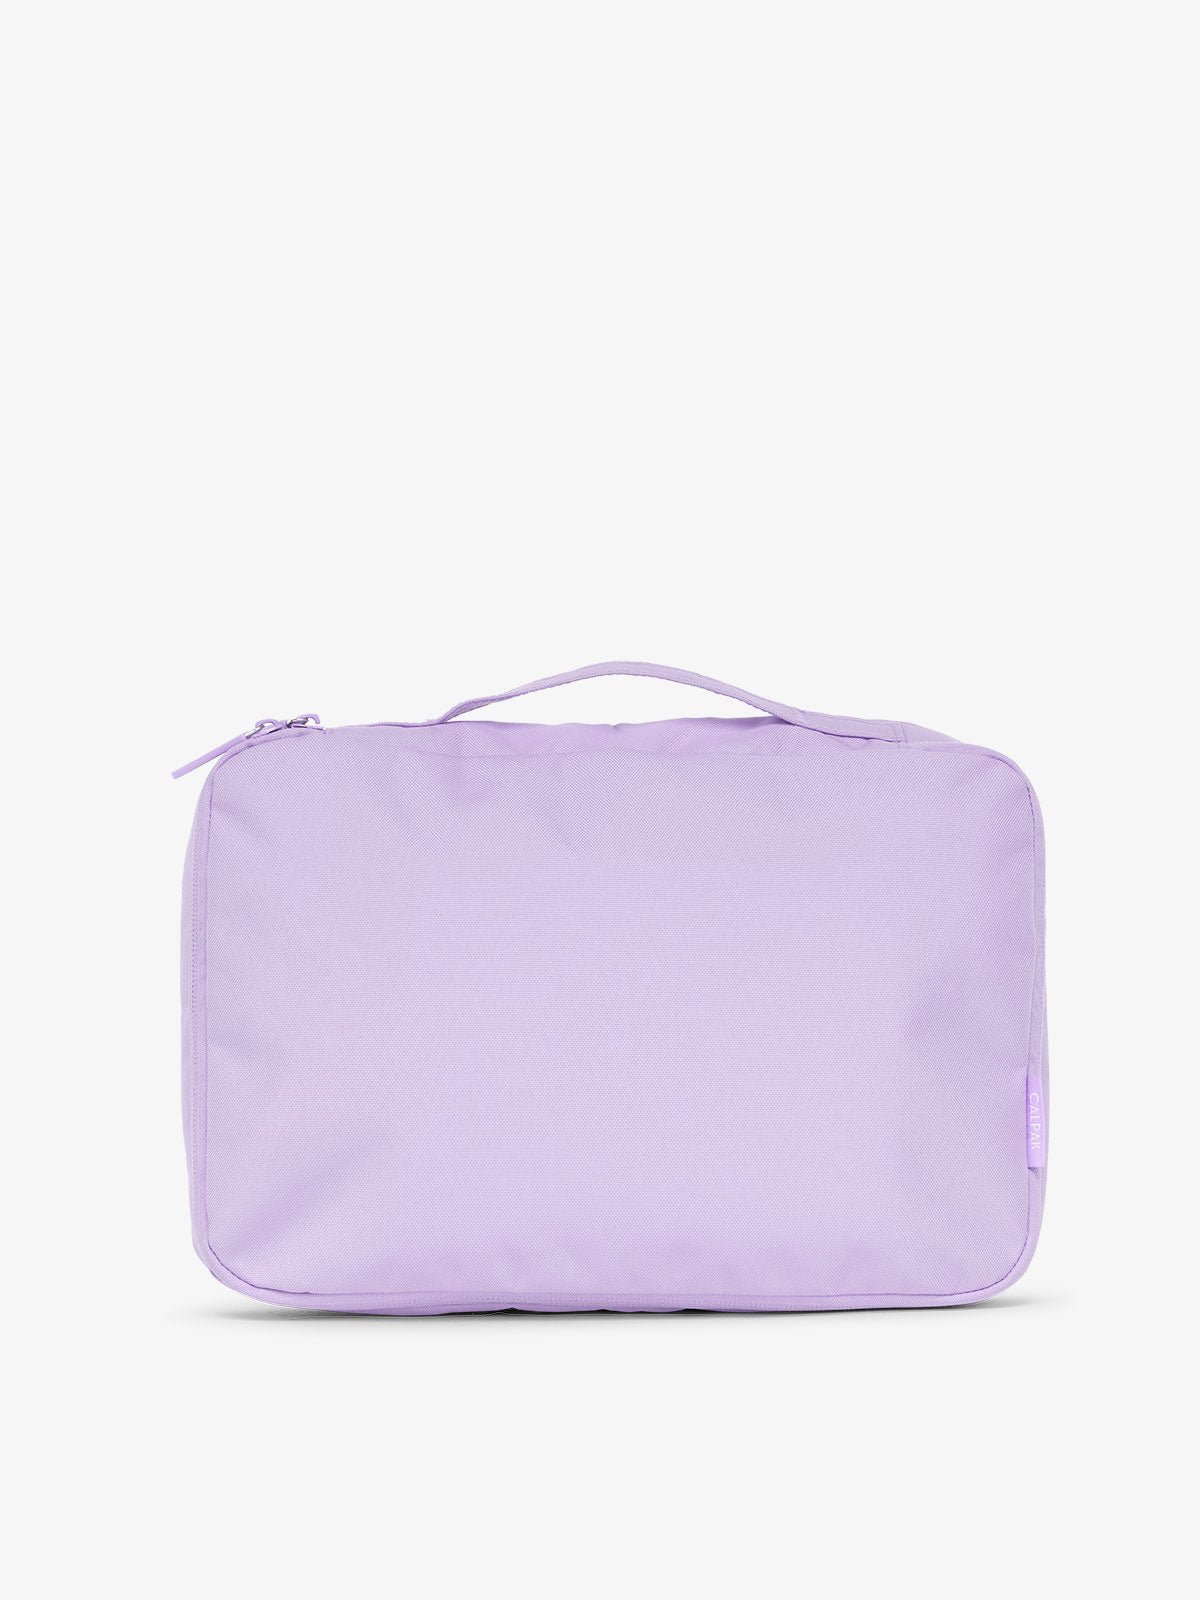 CALPAK packing cubes with top handle in light purple